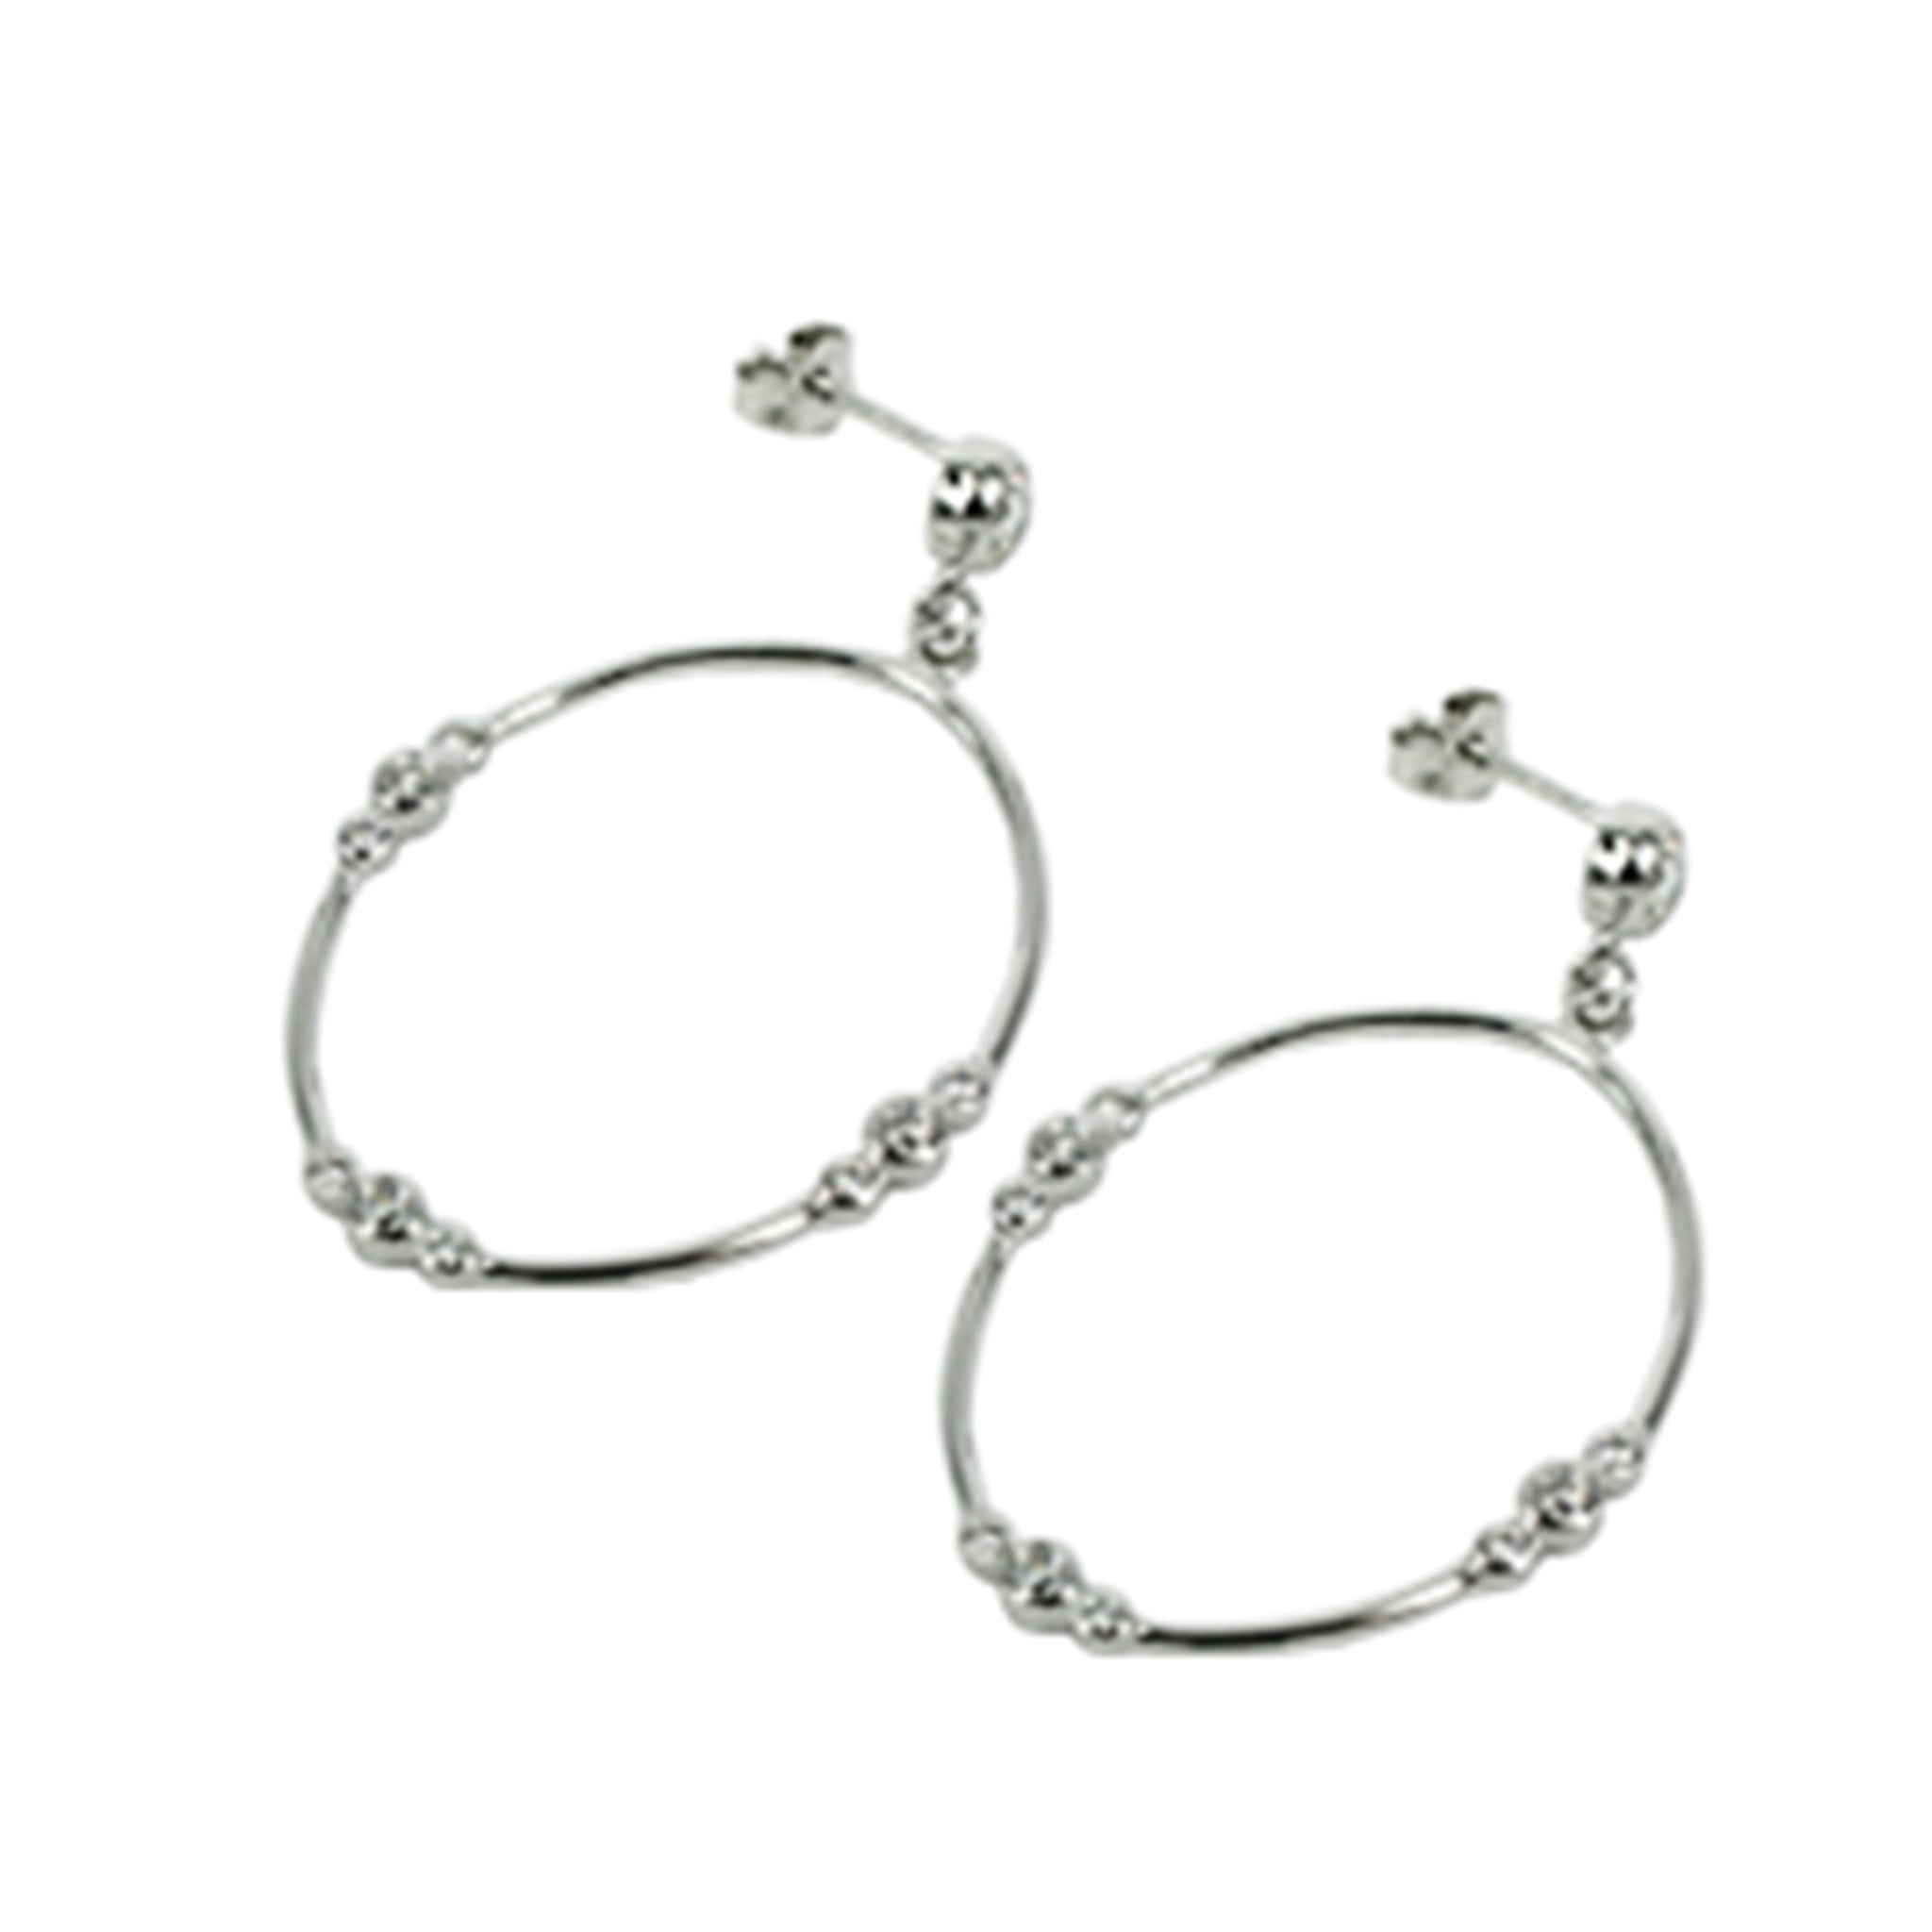 Ear Posts with Ball, Earring Components and Cubic Zirconia Inlays in Sterling Silver 46.34x28mm